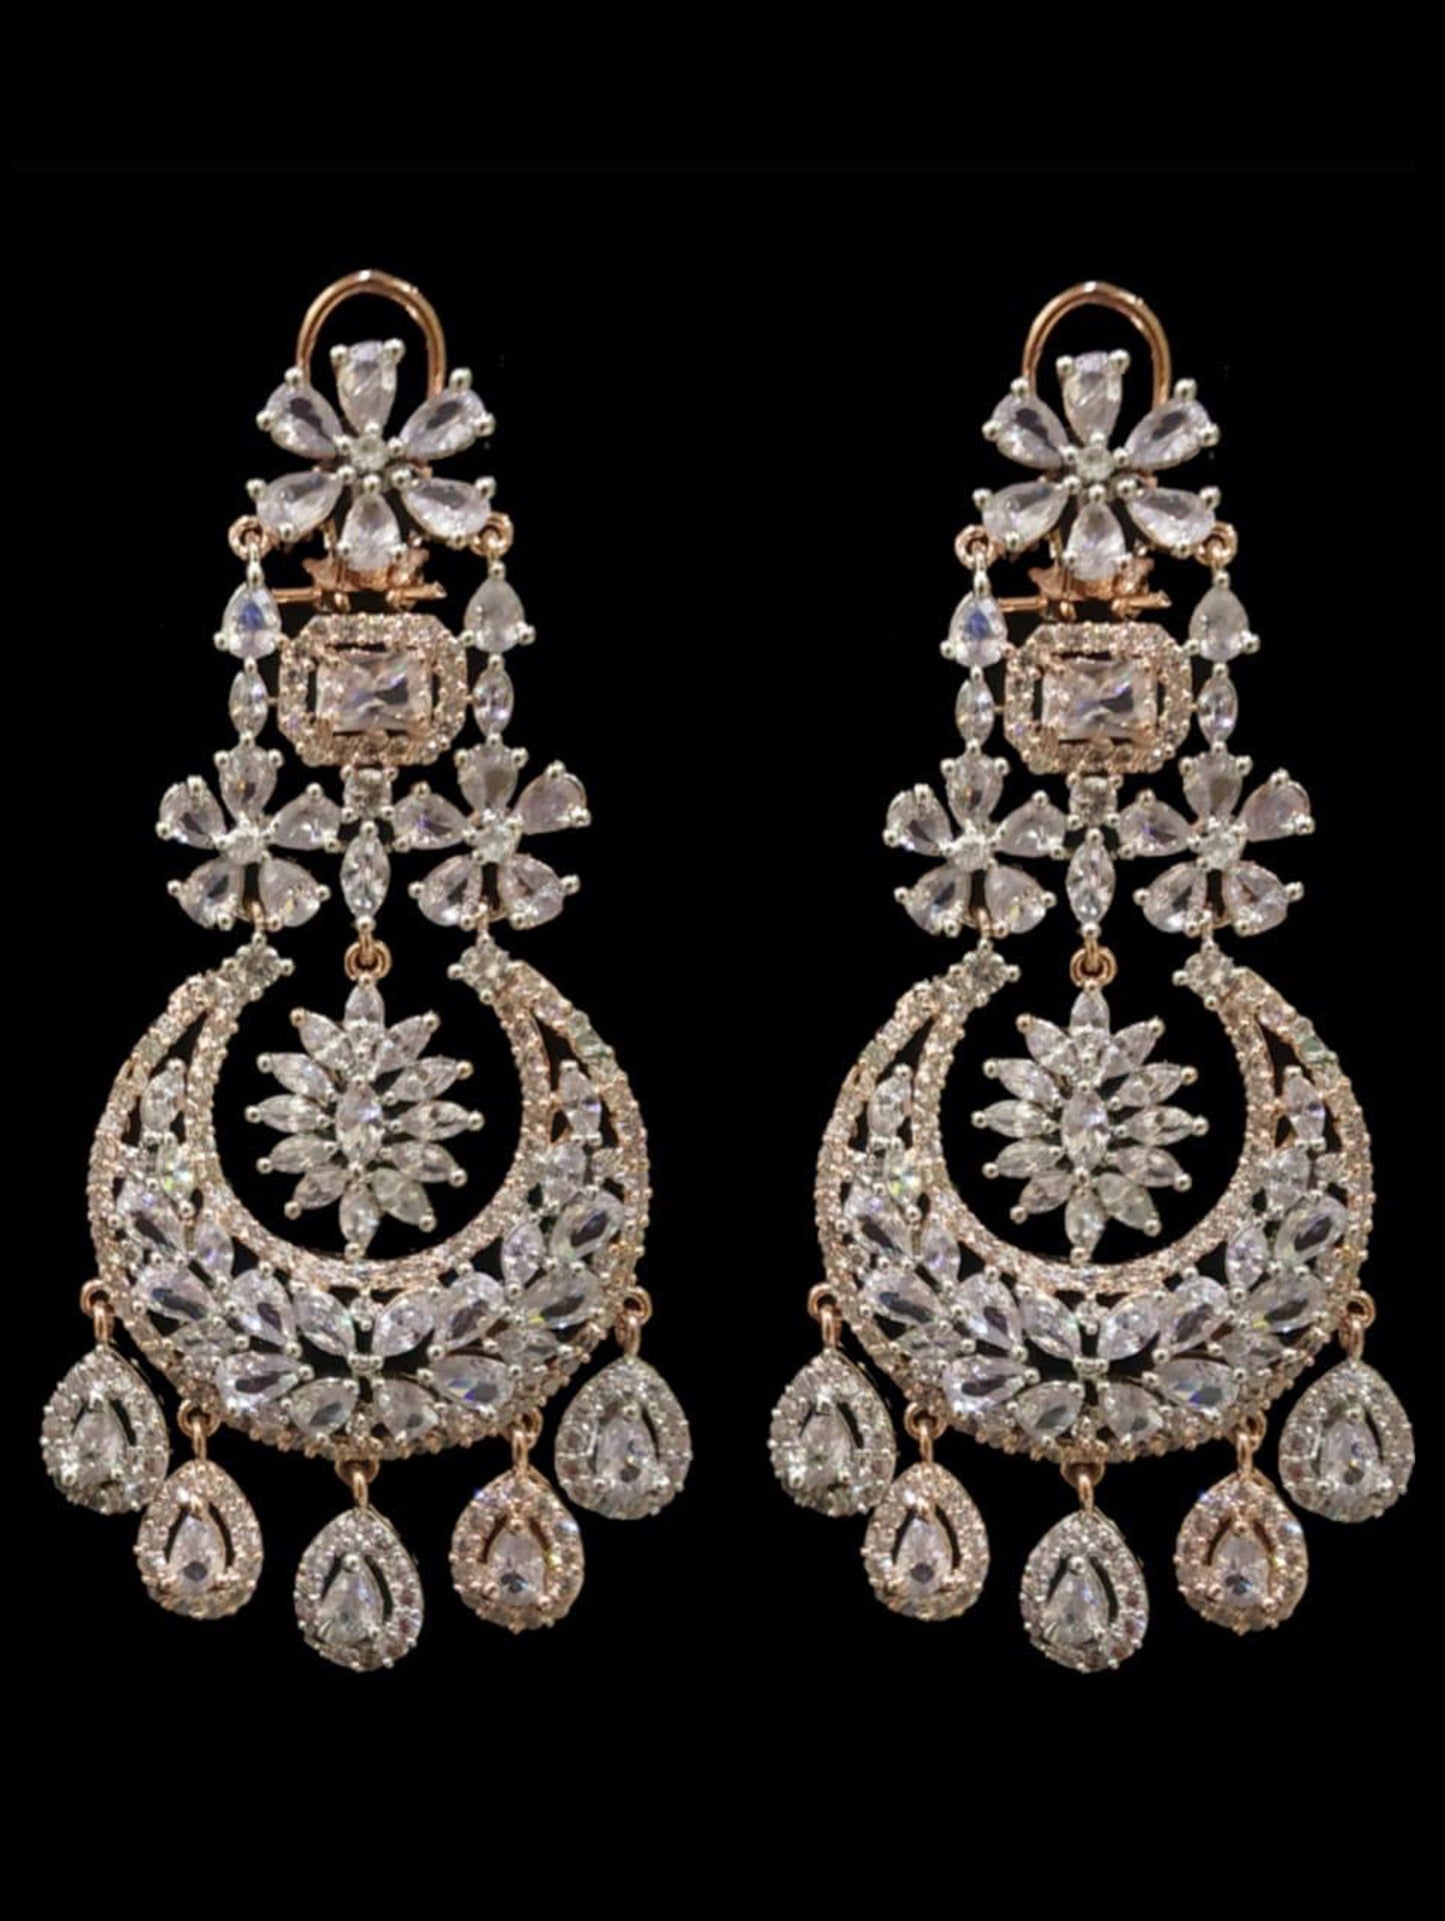 Load image into Gallery viewer, Fadia Earrings - bAnuDesigns
